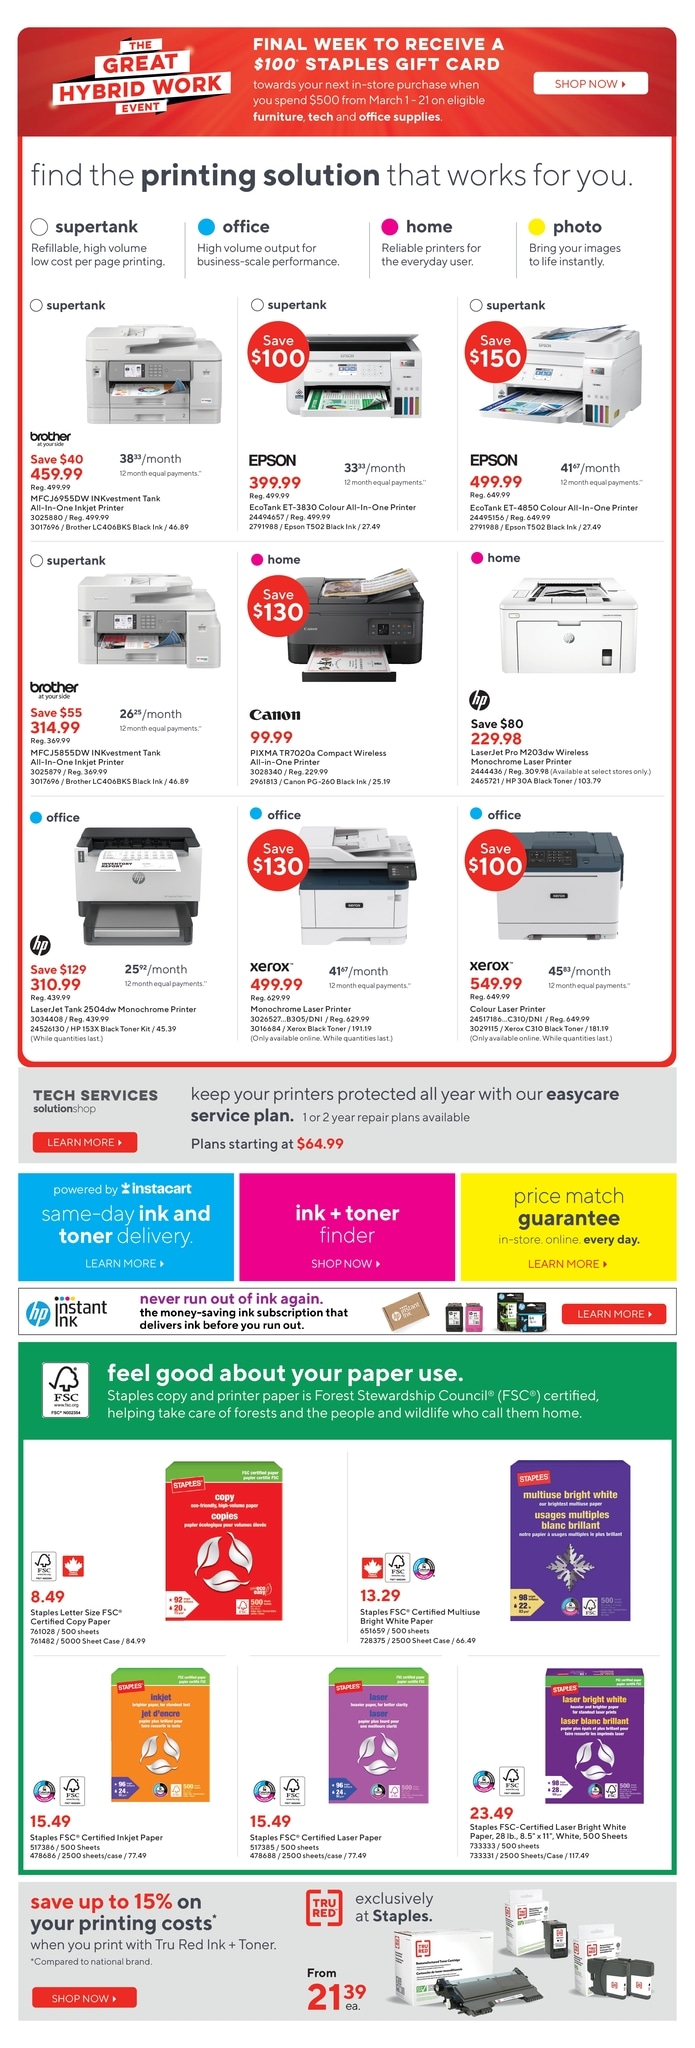 Staples - Weekly Flyer Specials - Page 3